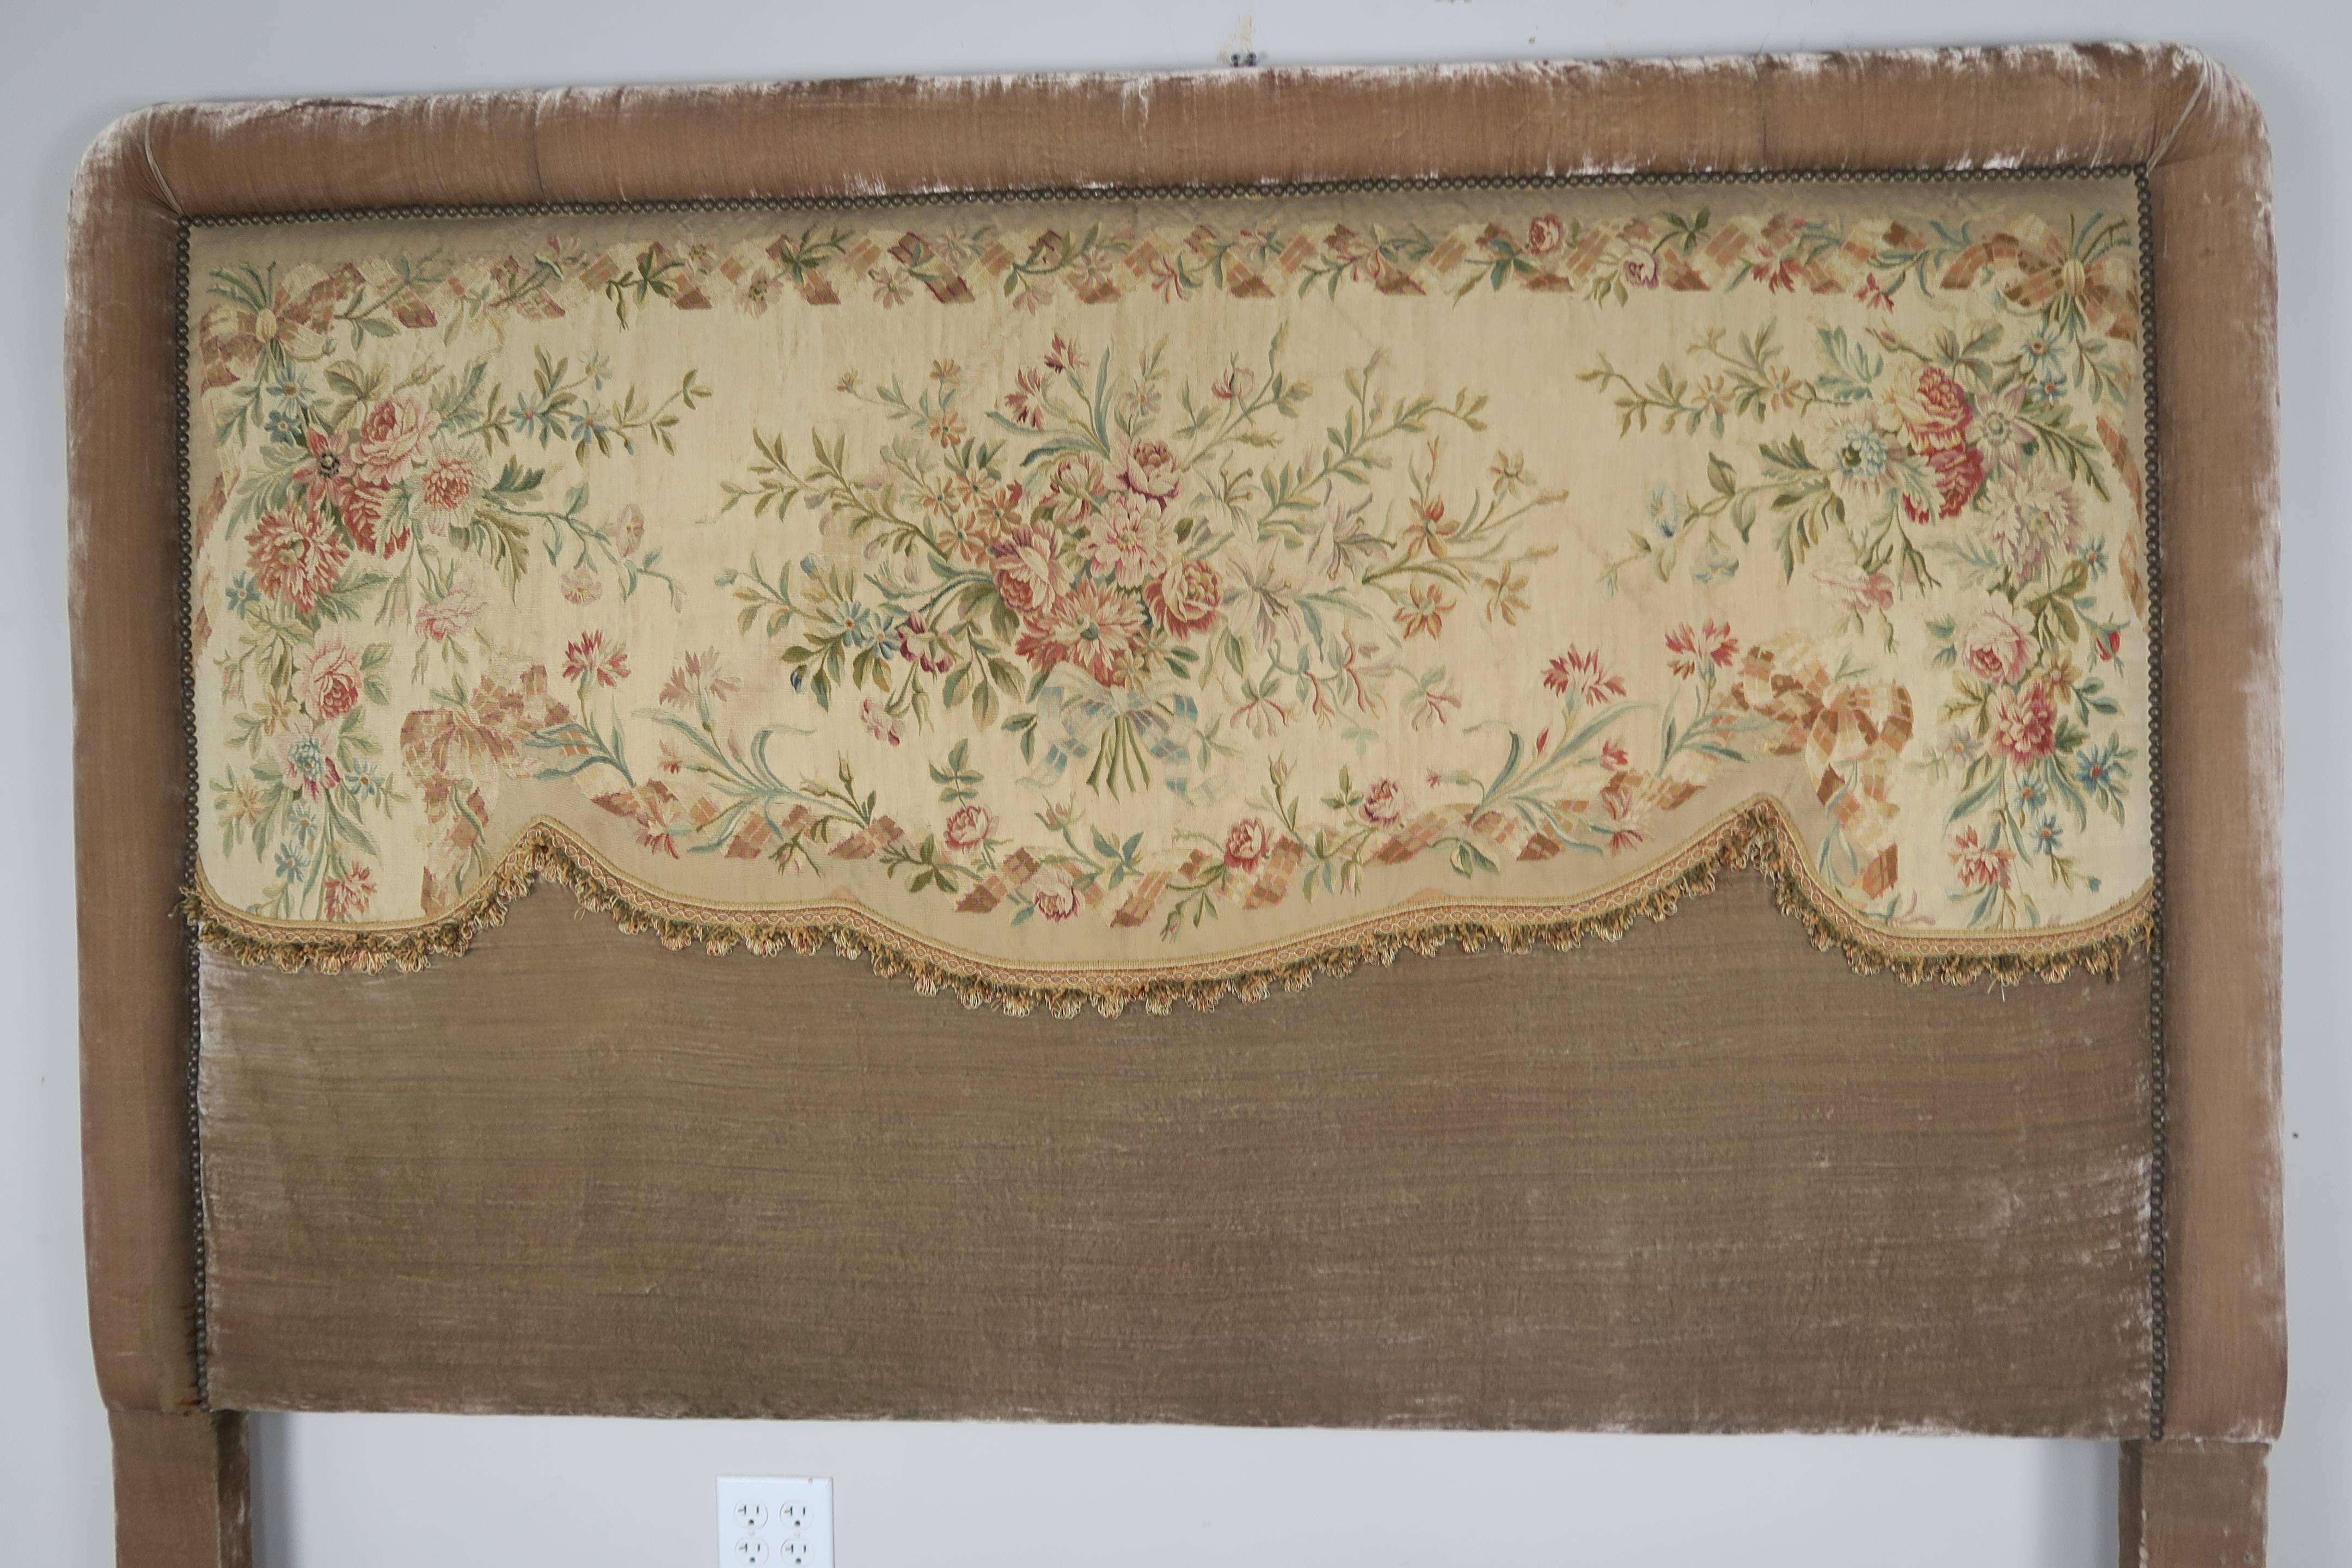 The rectangular headboard applied with a floral 19th century. Aubusson tapestry in a silk fringe, all enclosed in a bolstered muted rose colored velvet frame that is detailed with nail heads.